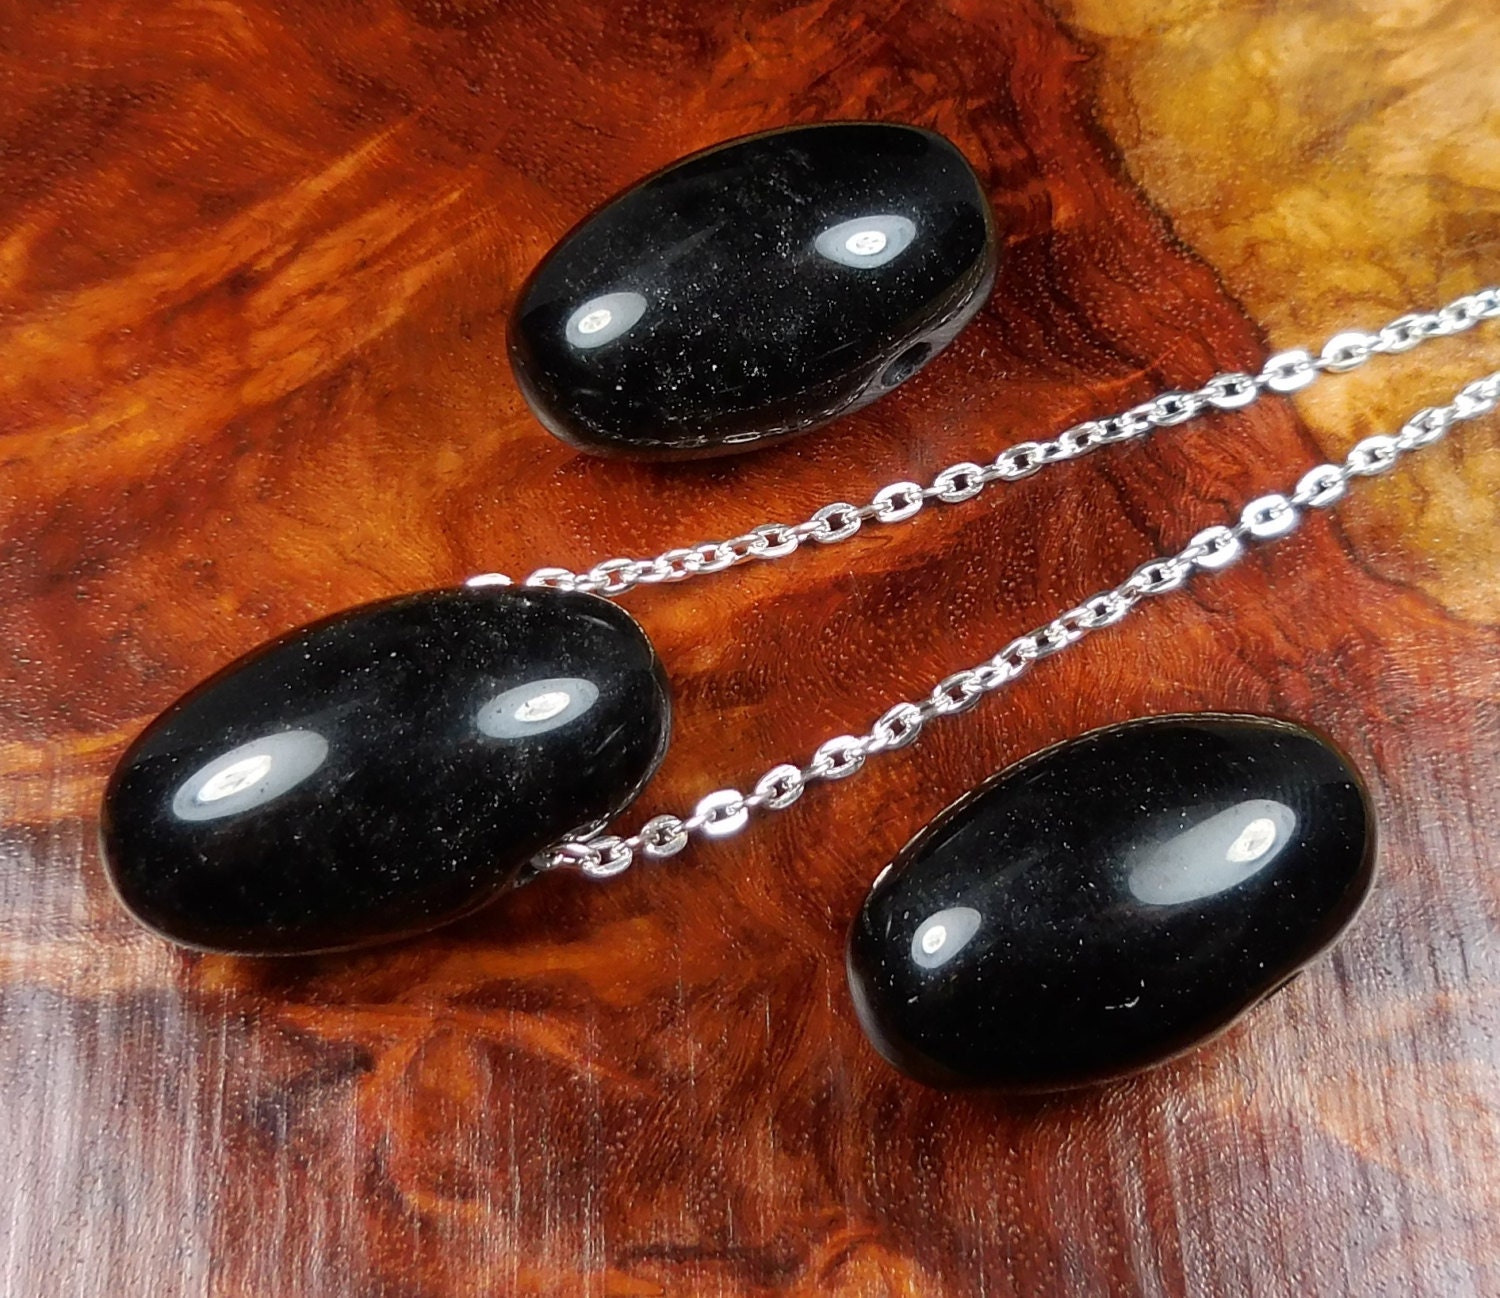 do you have to mount obsidian jewelry